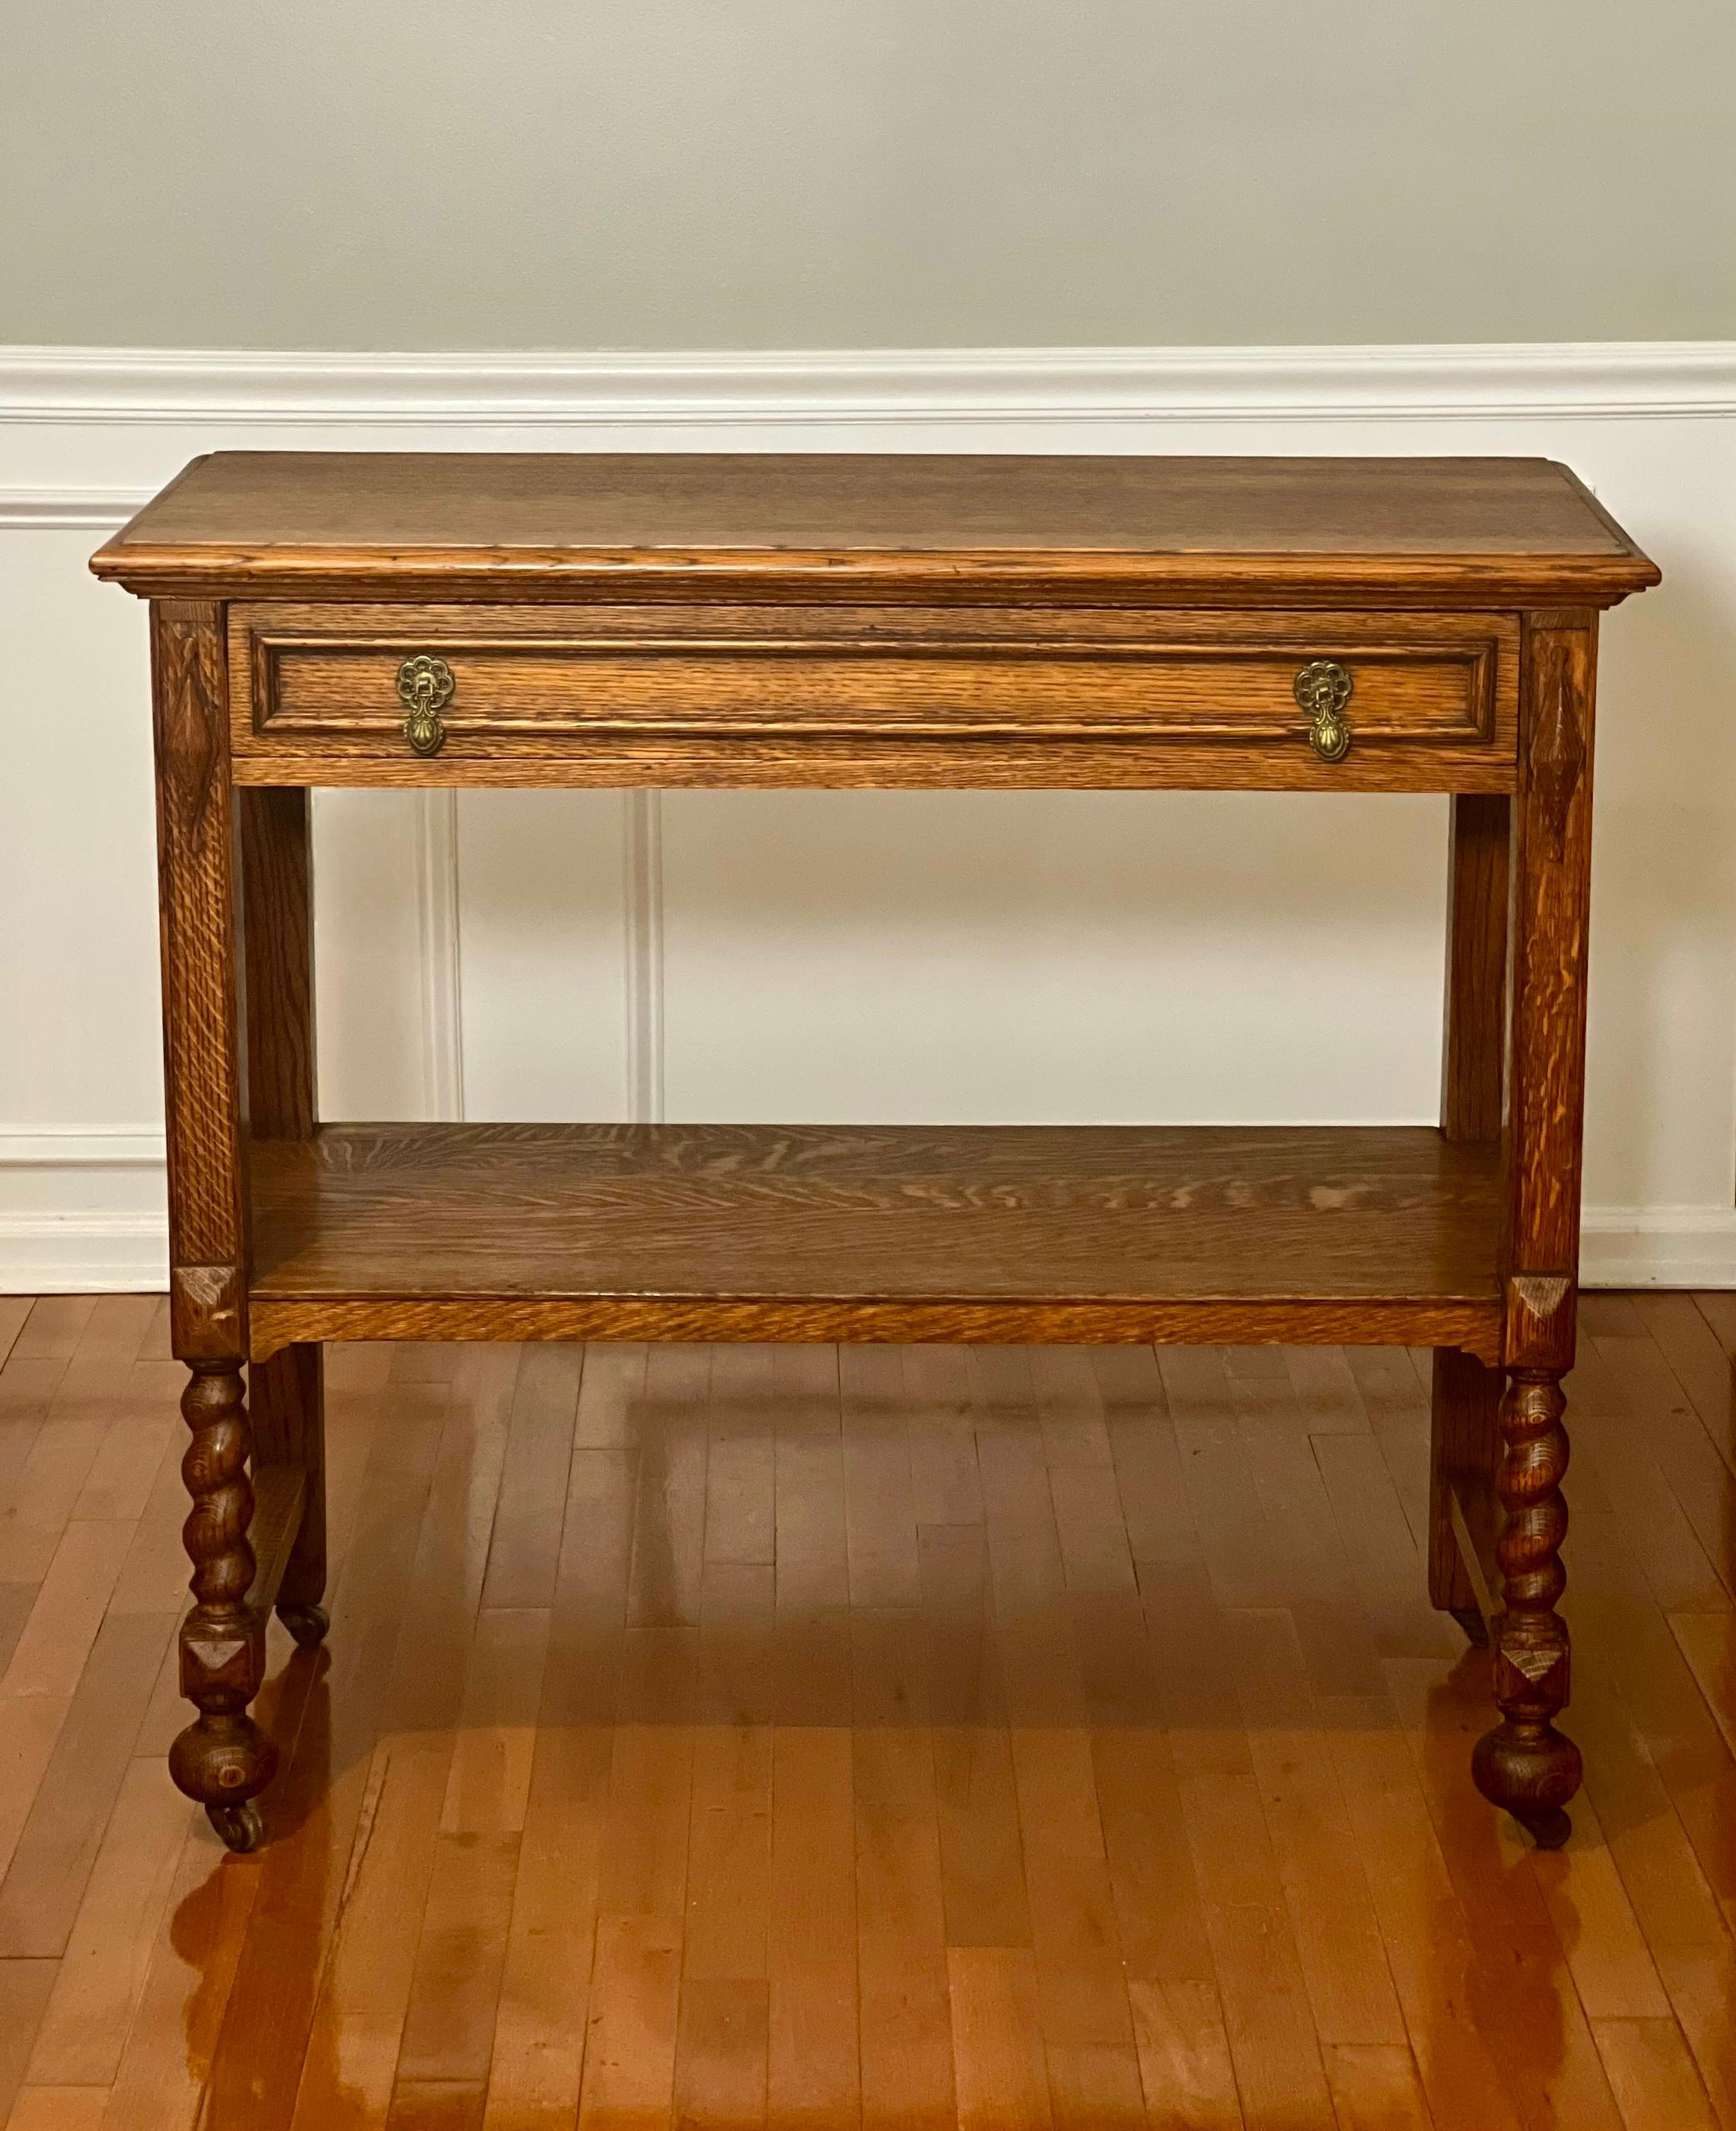 English quarter sawn oak two-tier server or console on casters, c. 1910.

Handsome server featuring a single dovetailed drawer with teardrop brass pulls and barley twist front supports. Carved, high relief diamond motifs flank the raised panel